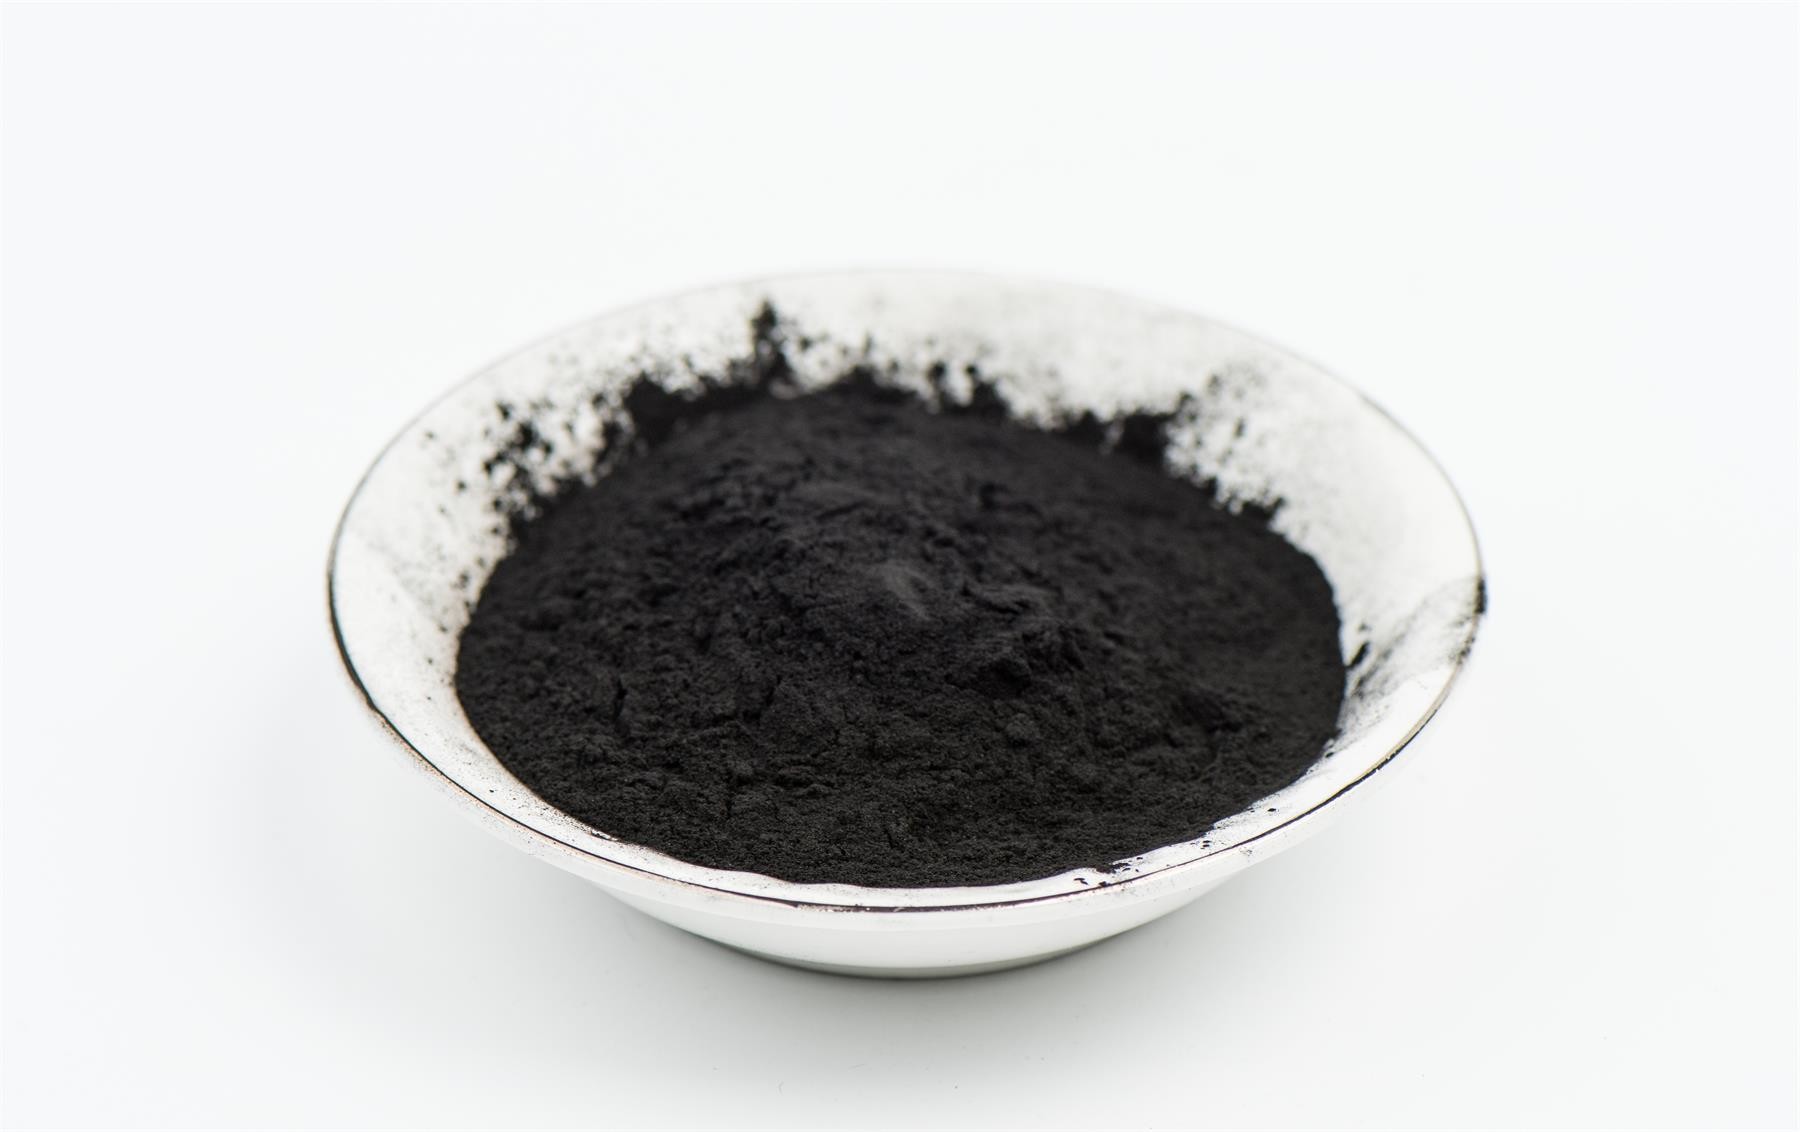 Best 64365 11 3 Wood Based Activated Carbon Powder 200 Mesh For Drinkg Water Treatment wholesale